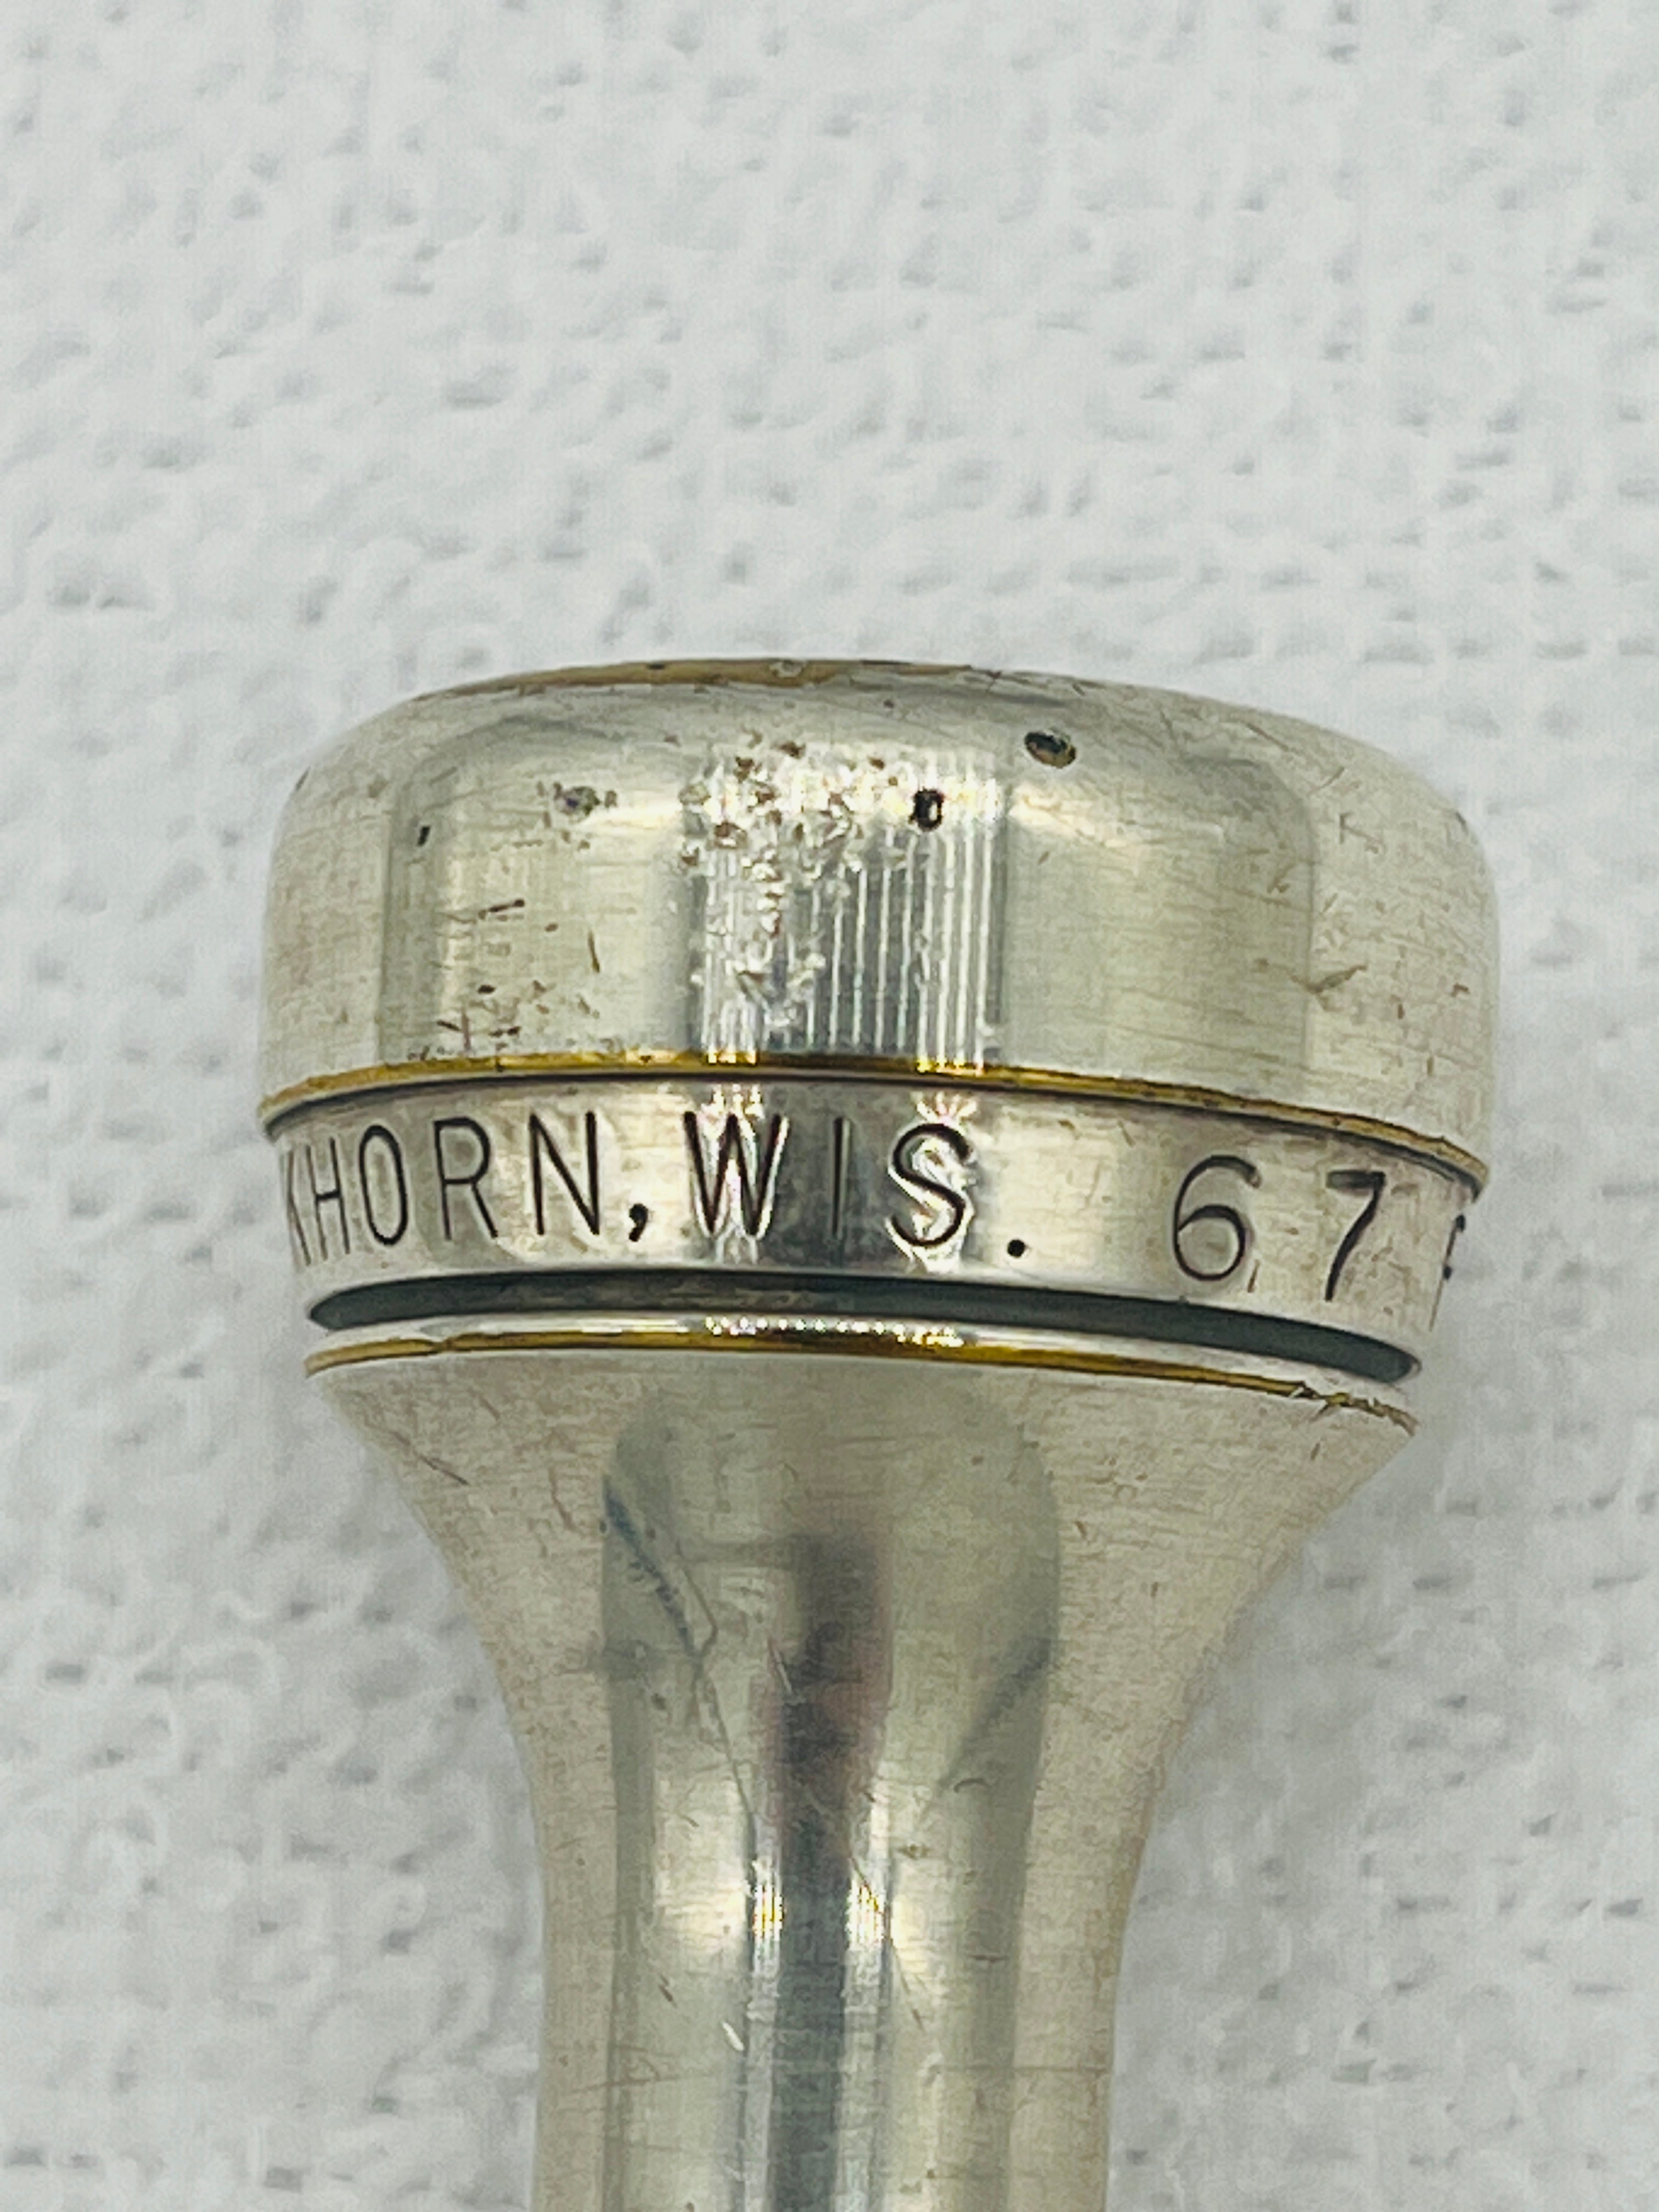 Frank Holton & Co. 67 Trumpet Mouthpiece Elkhorn, Wis. USA USED